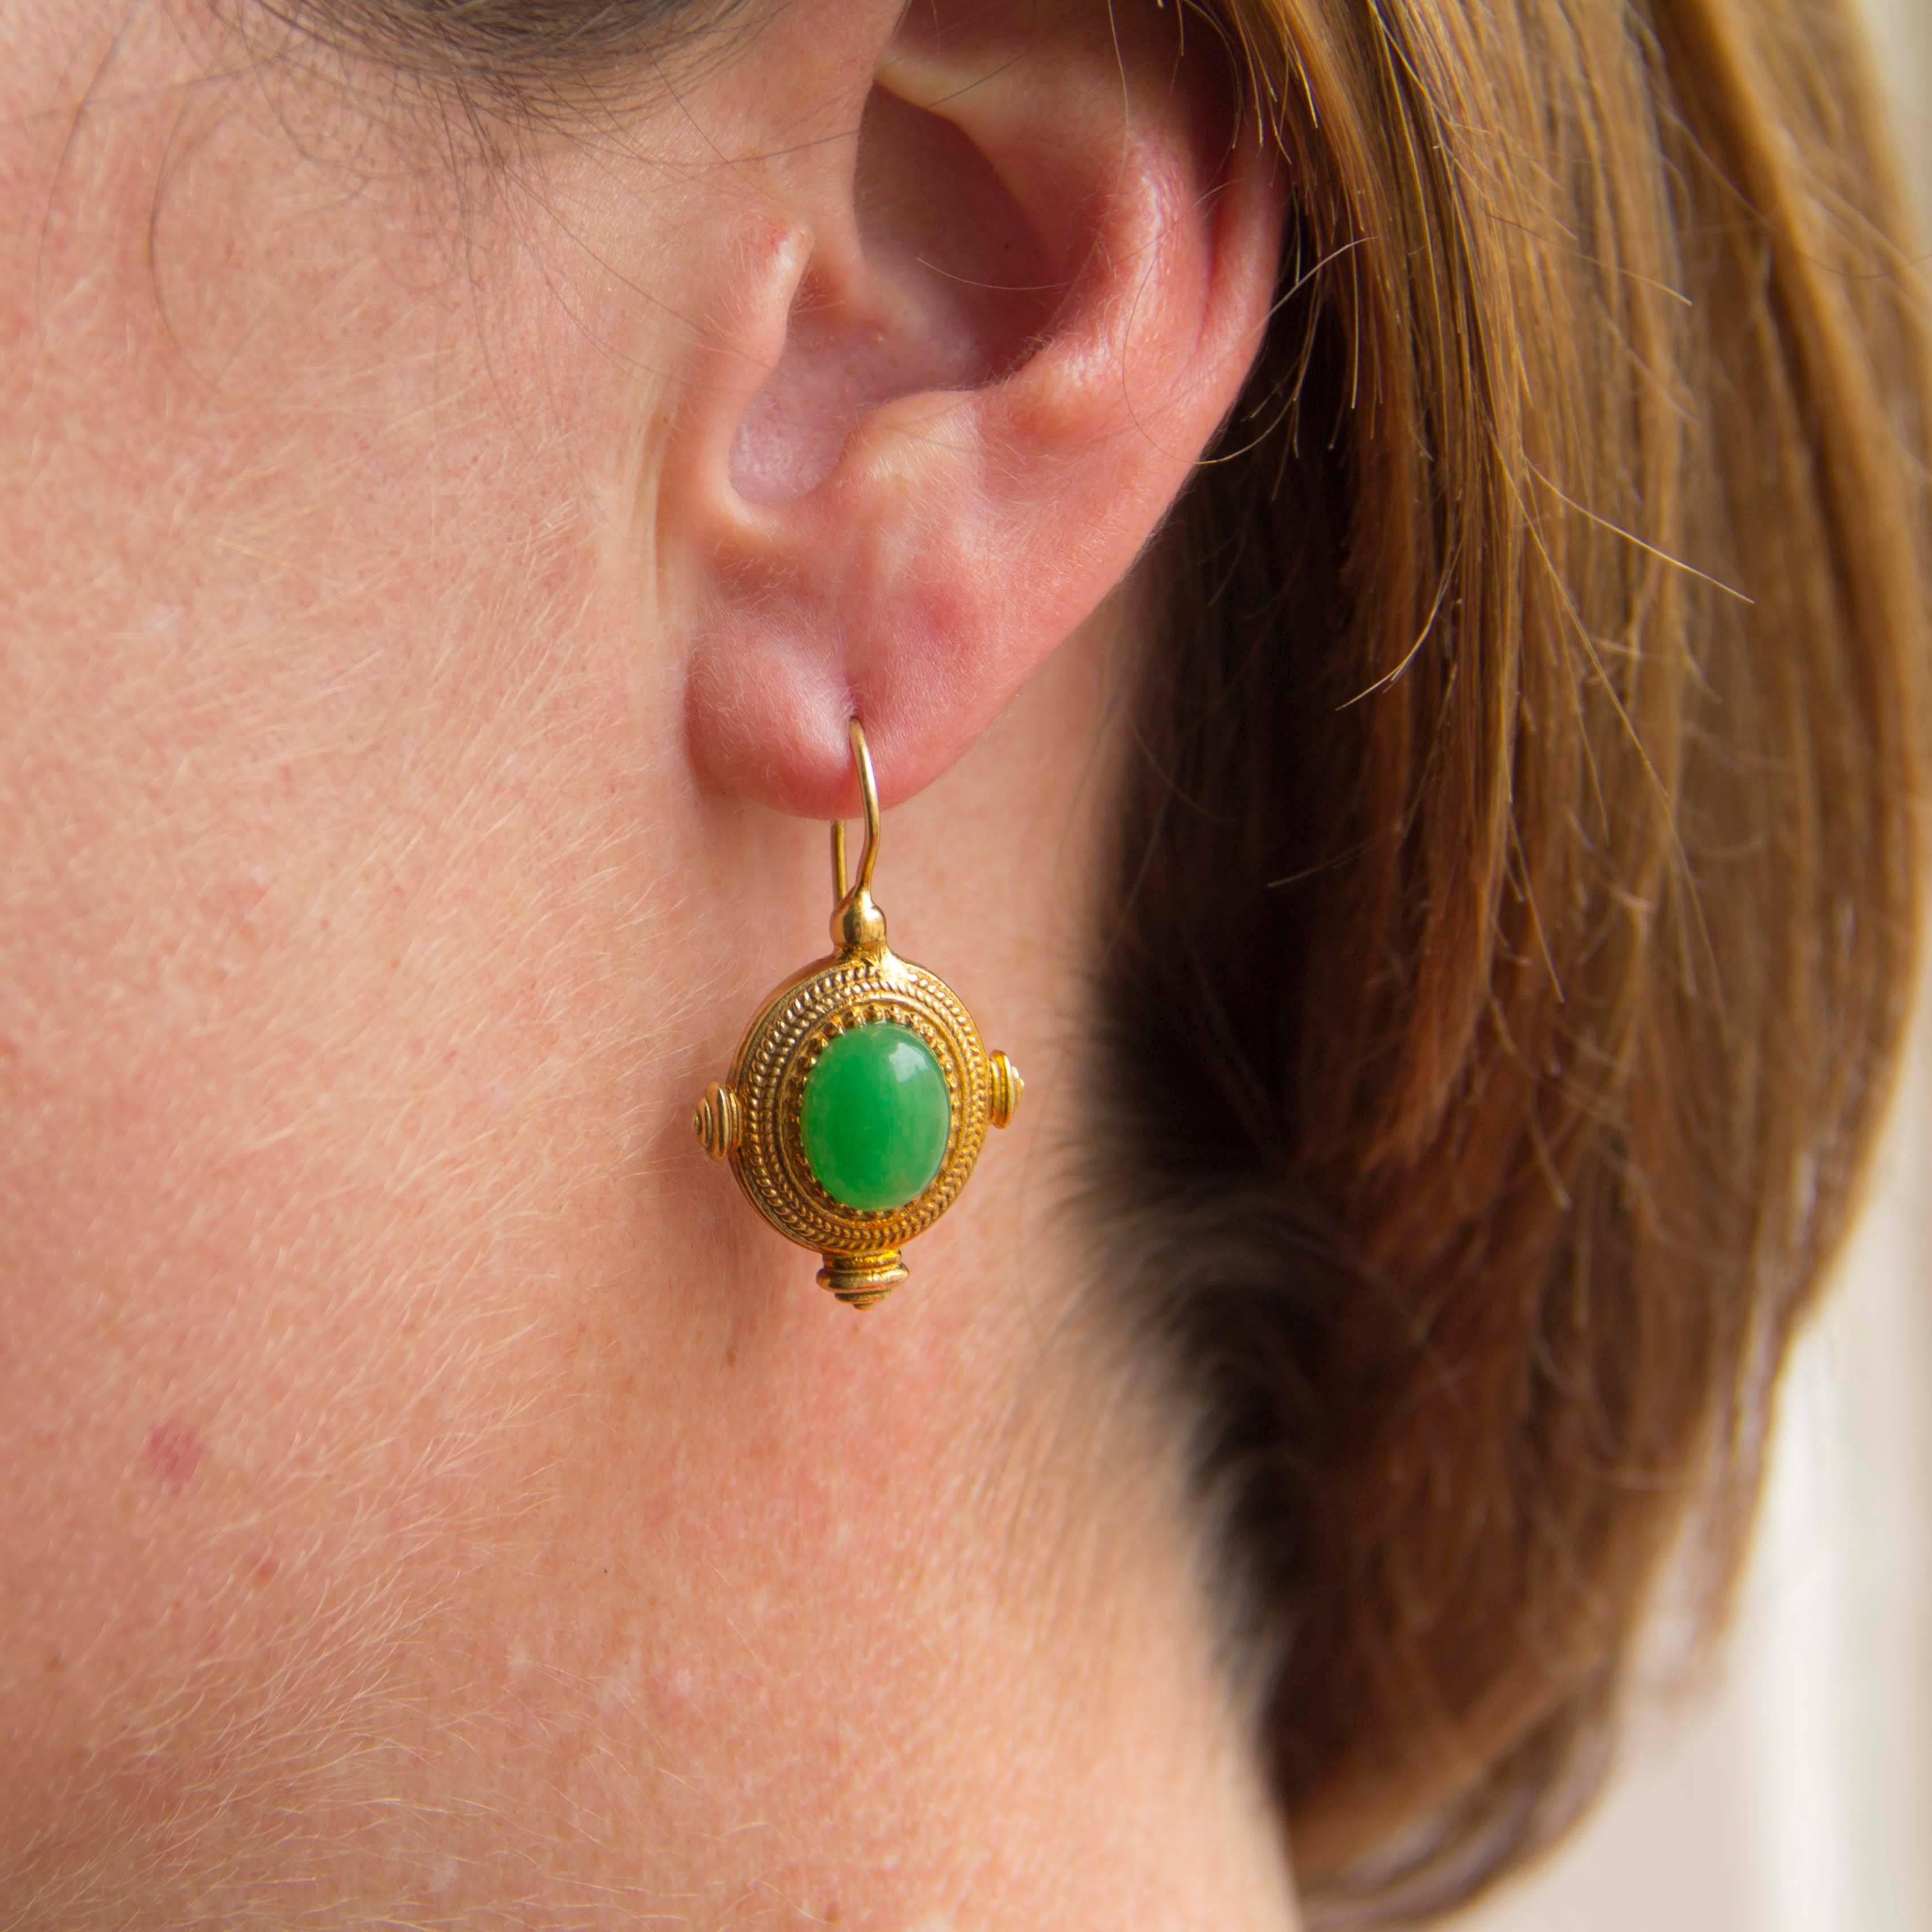 For pierced ears.
Pair of vermeil, 925 silver and yellow gold earrings.
They are set with a green cabochon crystal. The hanging system is a gooseneck with safety hook.
Length: 3.4 cm, width: 2 cm.
New jewel signed by the Italian designer Marcello